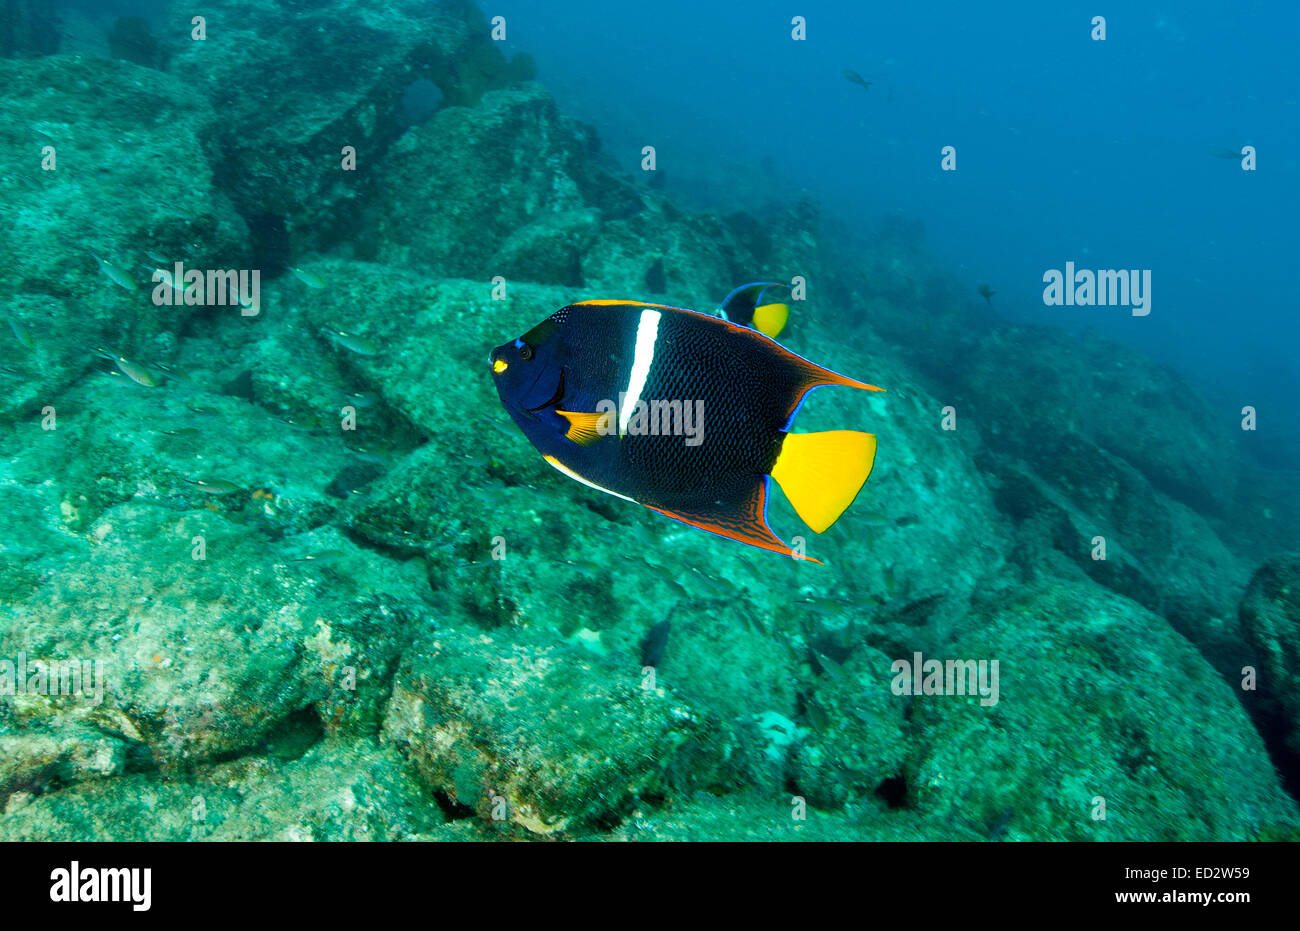 The King Angelfish (Holacanthus passer) photographed at Cabo Pulmo, Mexico Stock Photo